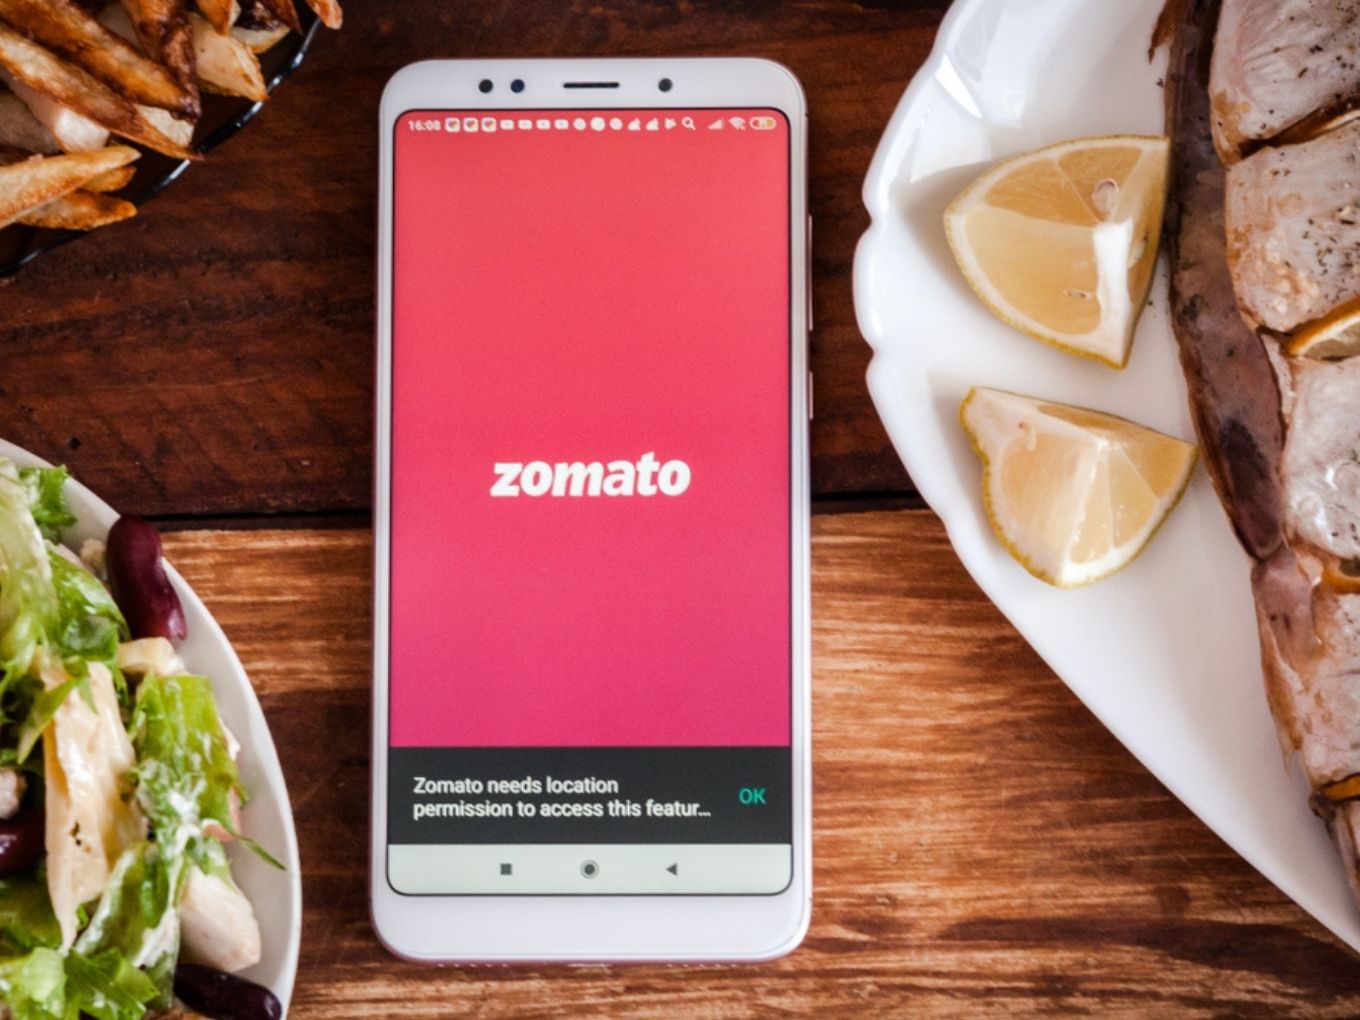 Steadview, Mirae Asset, Luxor & Bow Wave Could Deliver $150 Mn To Zomato